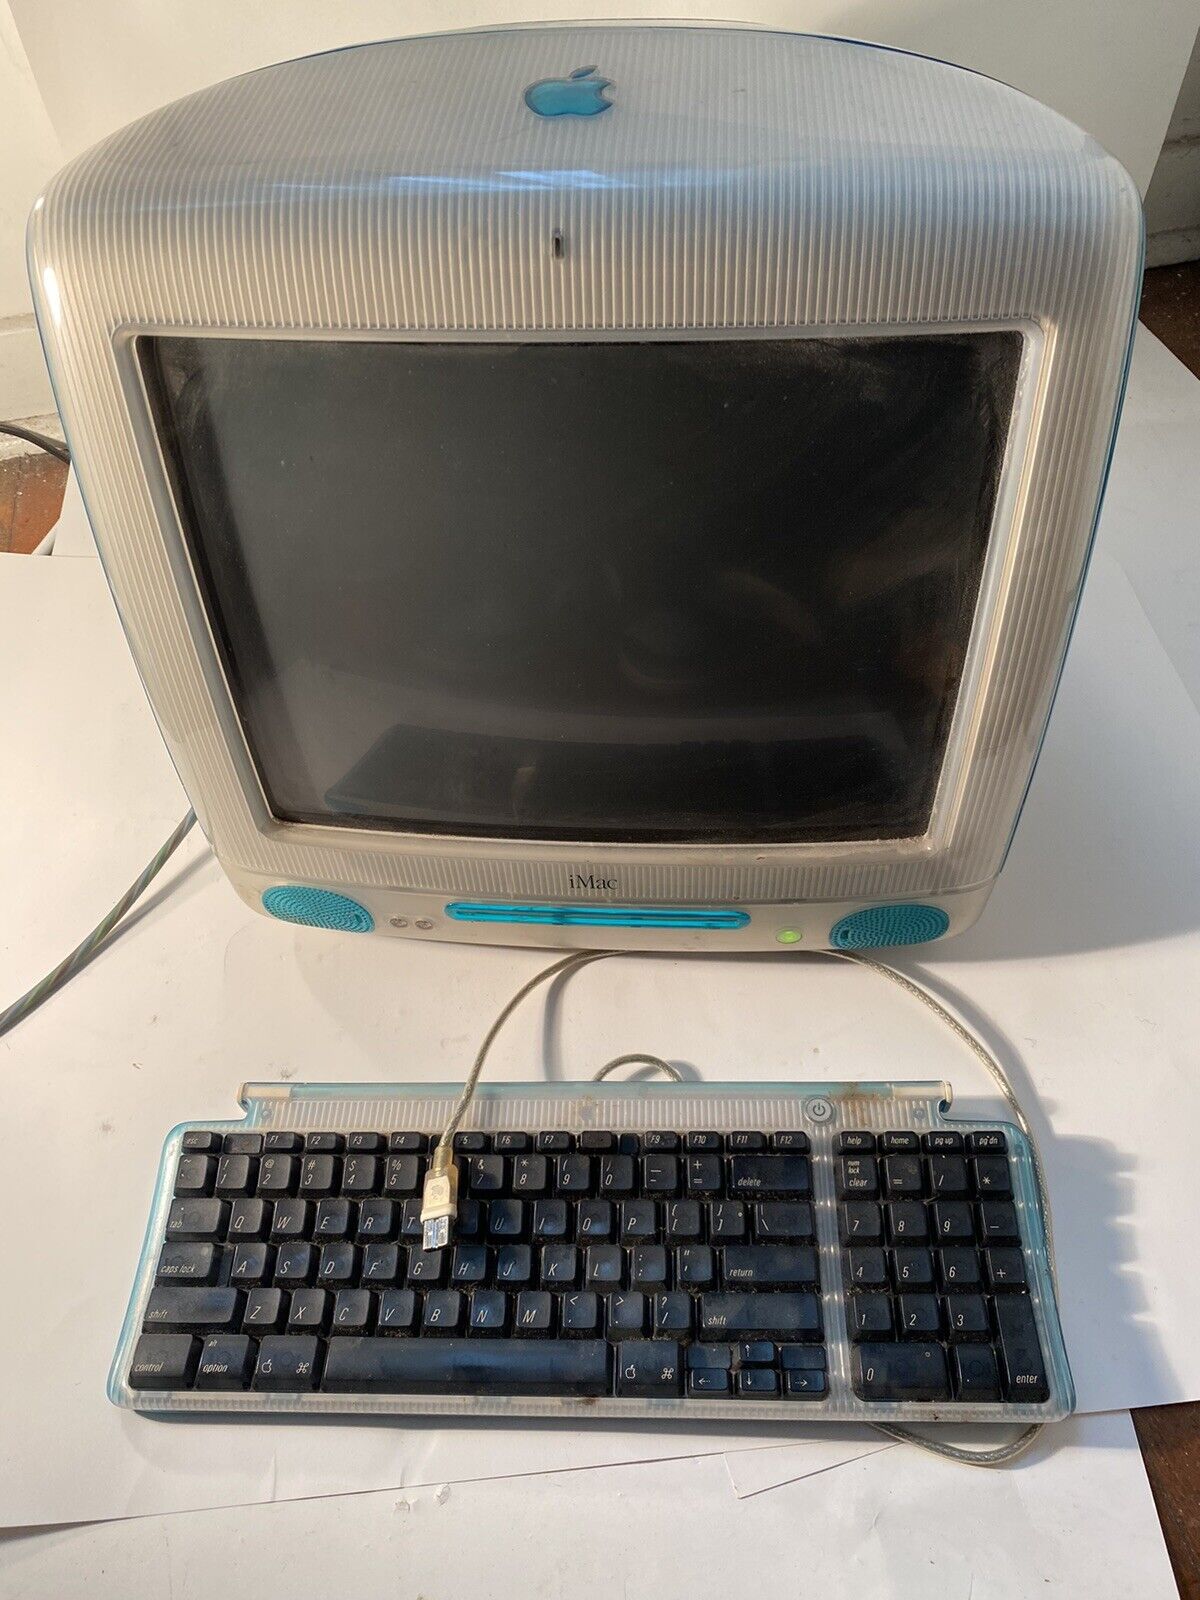 1998 Apple iMac G3  Computer with Keyboard  Blueberry Powers Up Screen Blank